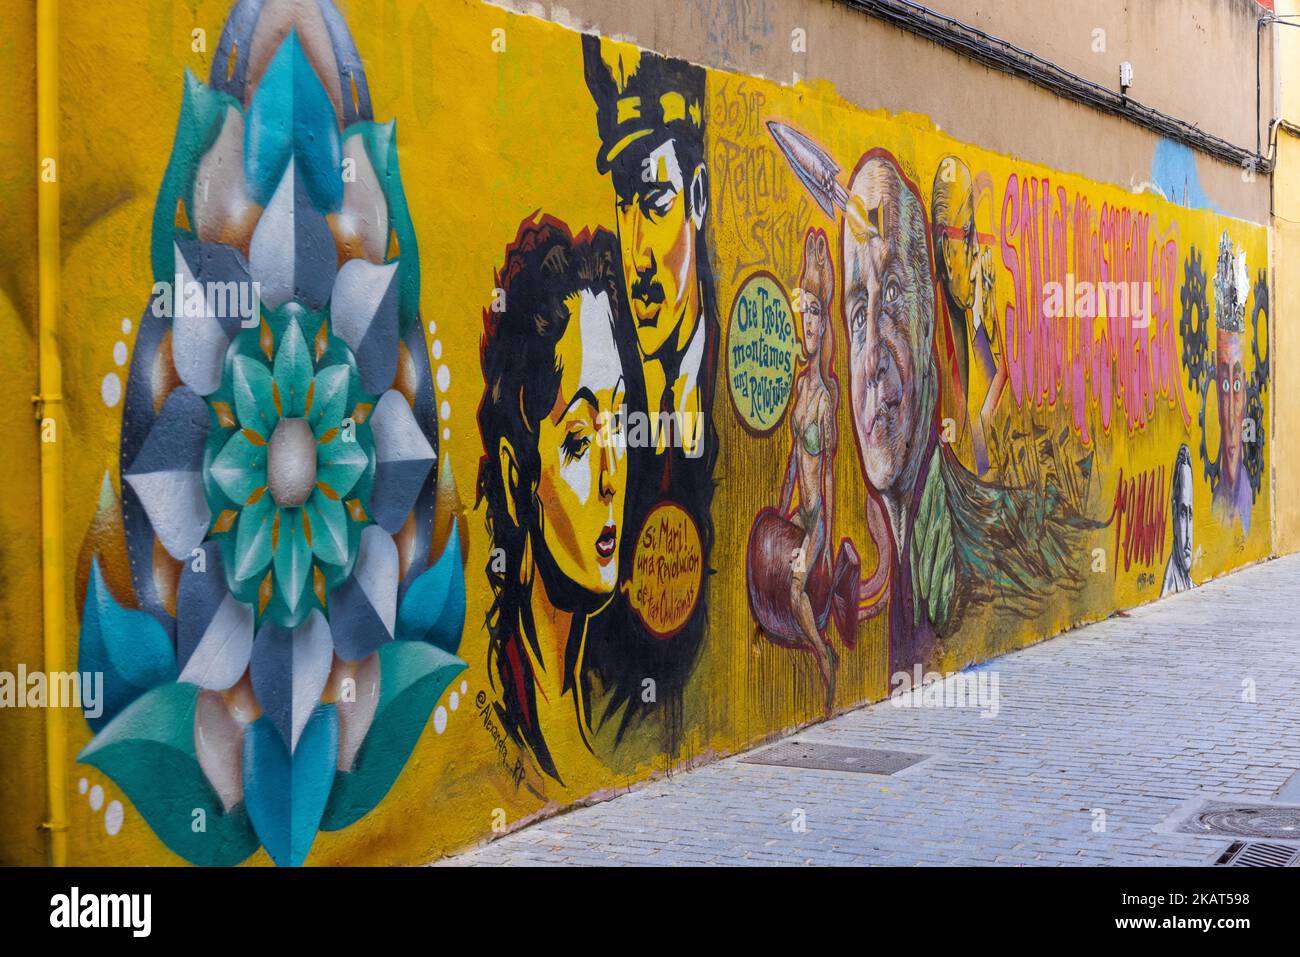 'If you love a revolution of cool aunts' Wall art, Calle de Cañete, Valencia, Spain Stock Photo